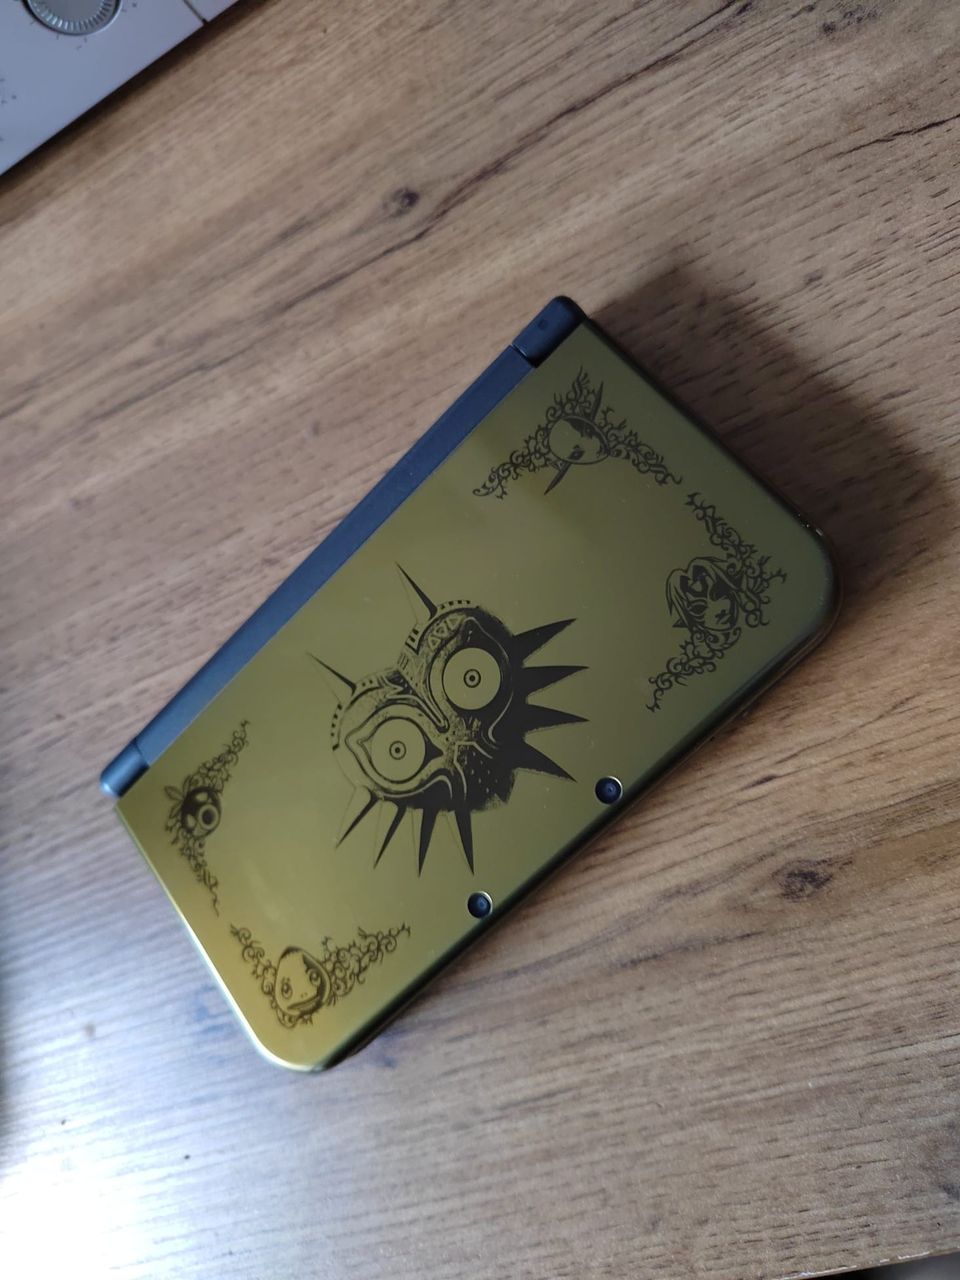 New 3ds Xl Majoras Mask edition